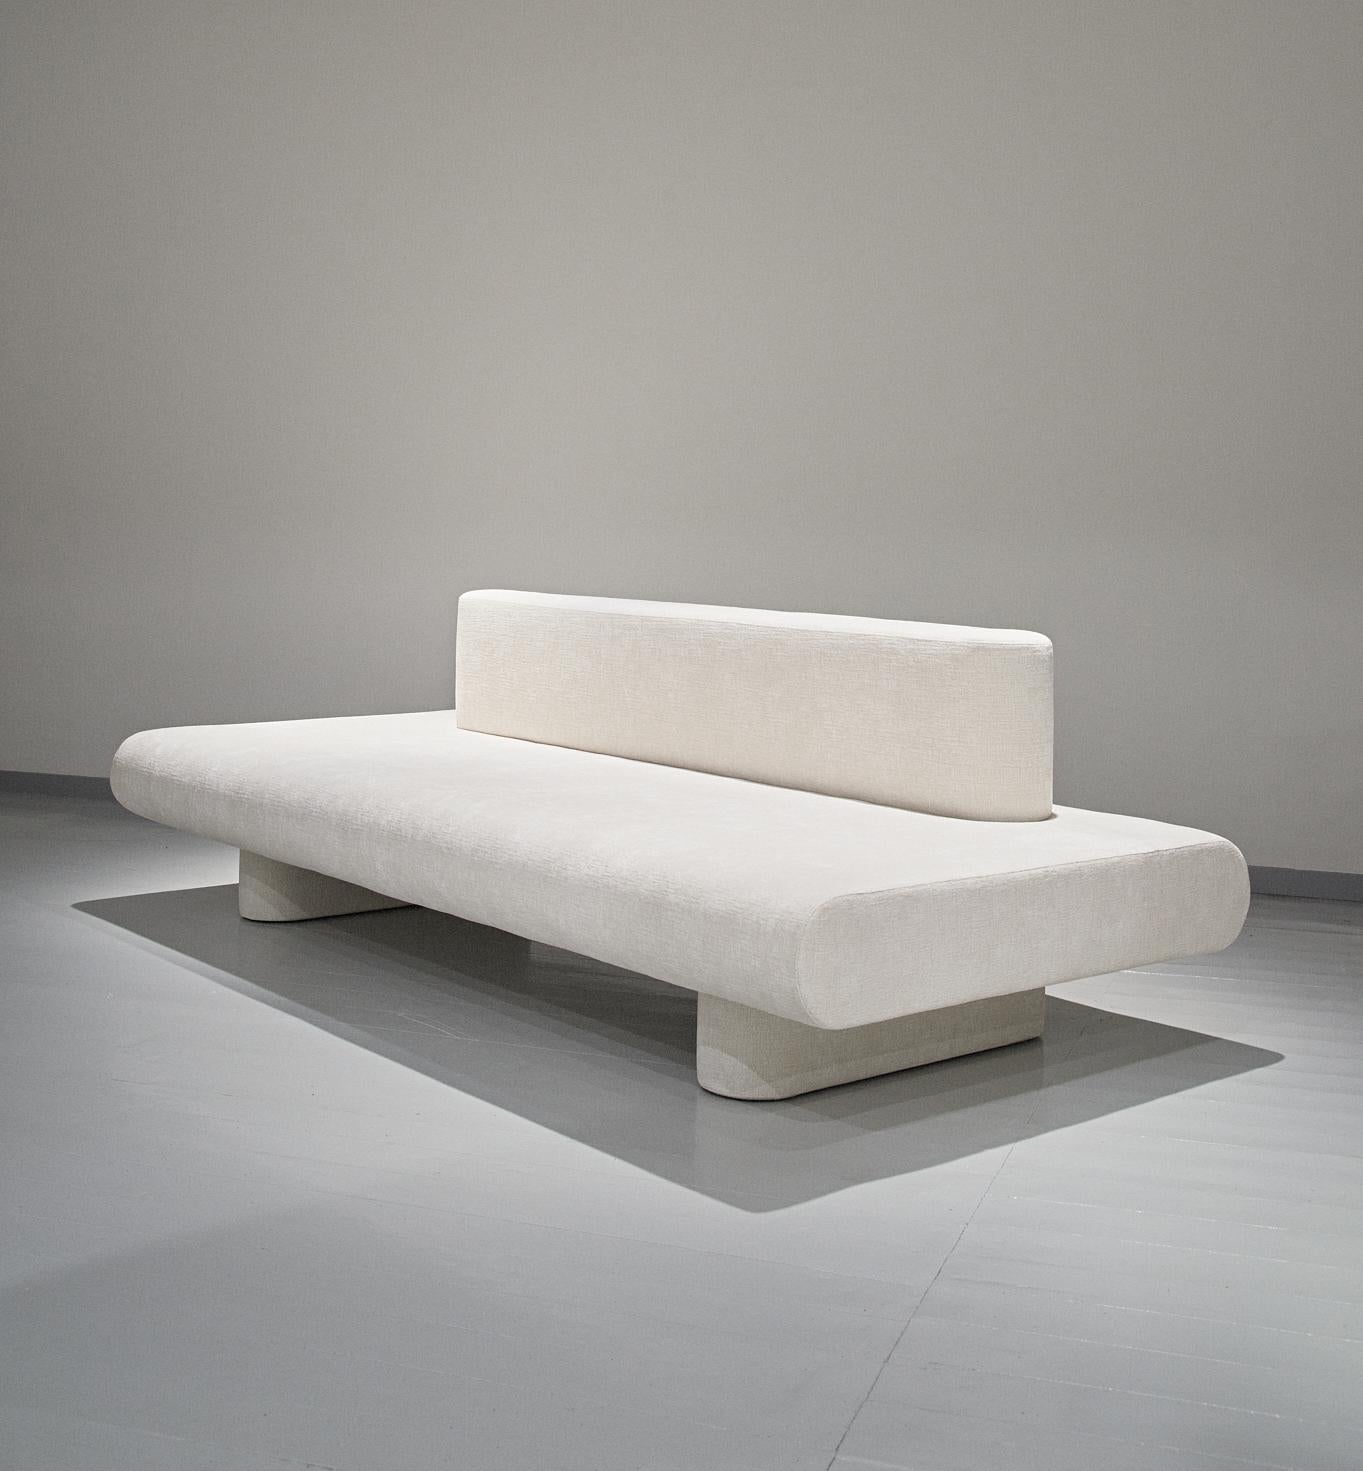 Olga Engel's new Flowers modular collection comprises of a sofa and modular chairs. Chairs can be connected versus each other in a multiple way. Flowers is an allusion to simple white field flowers composition. Soft sofa with a very simple and